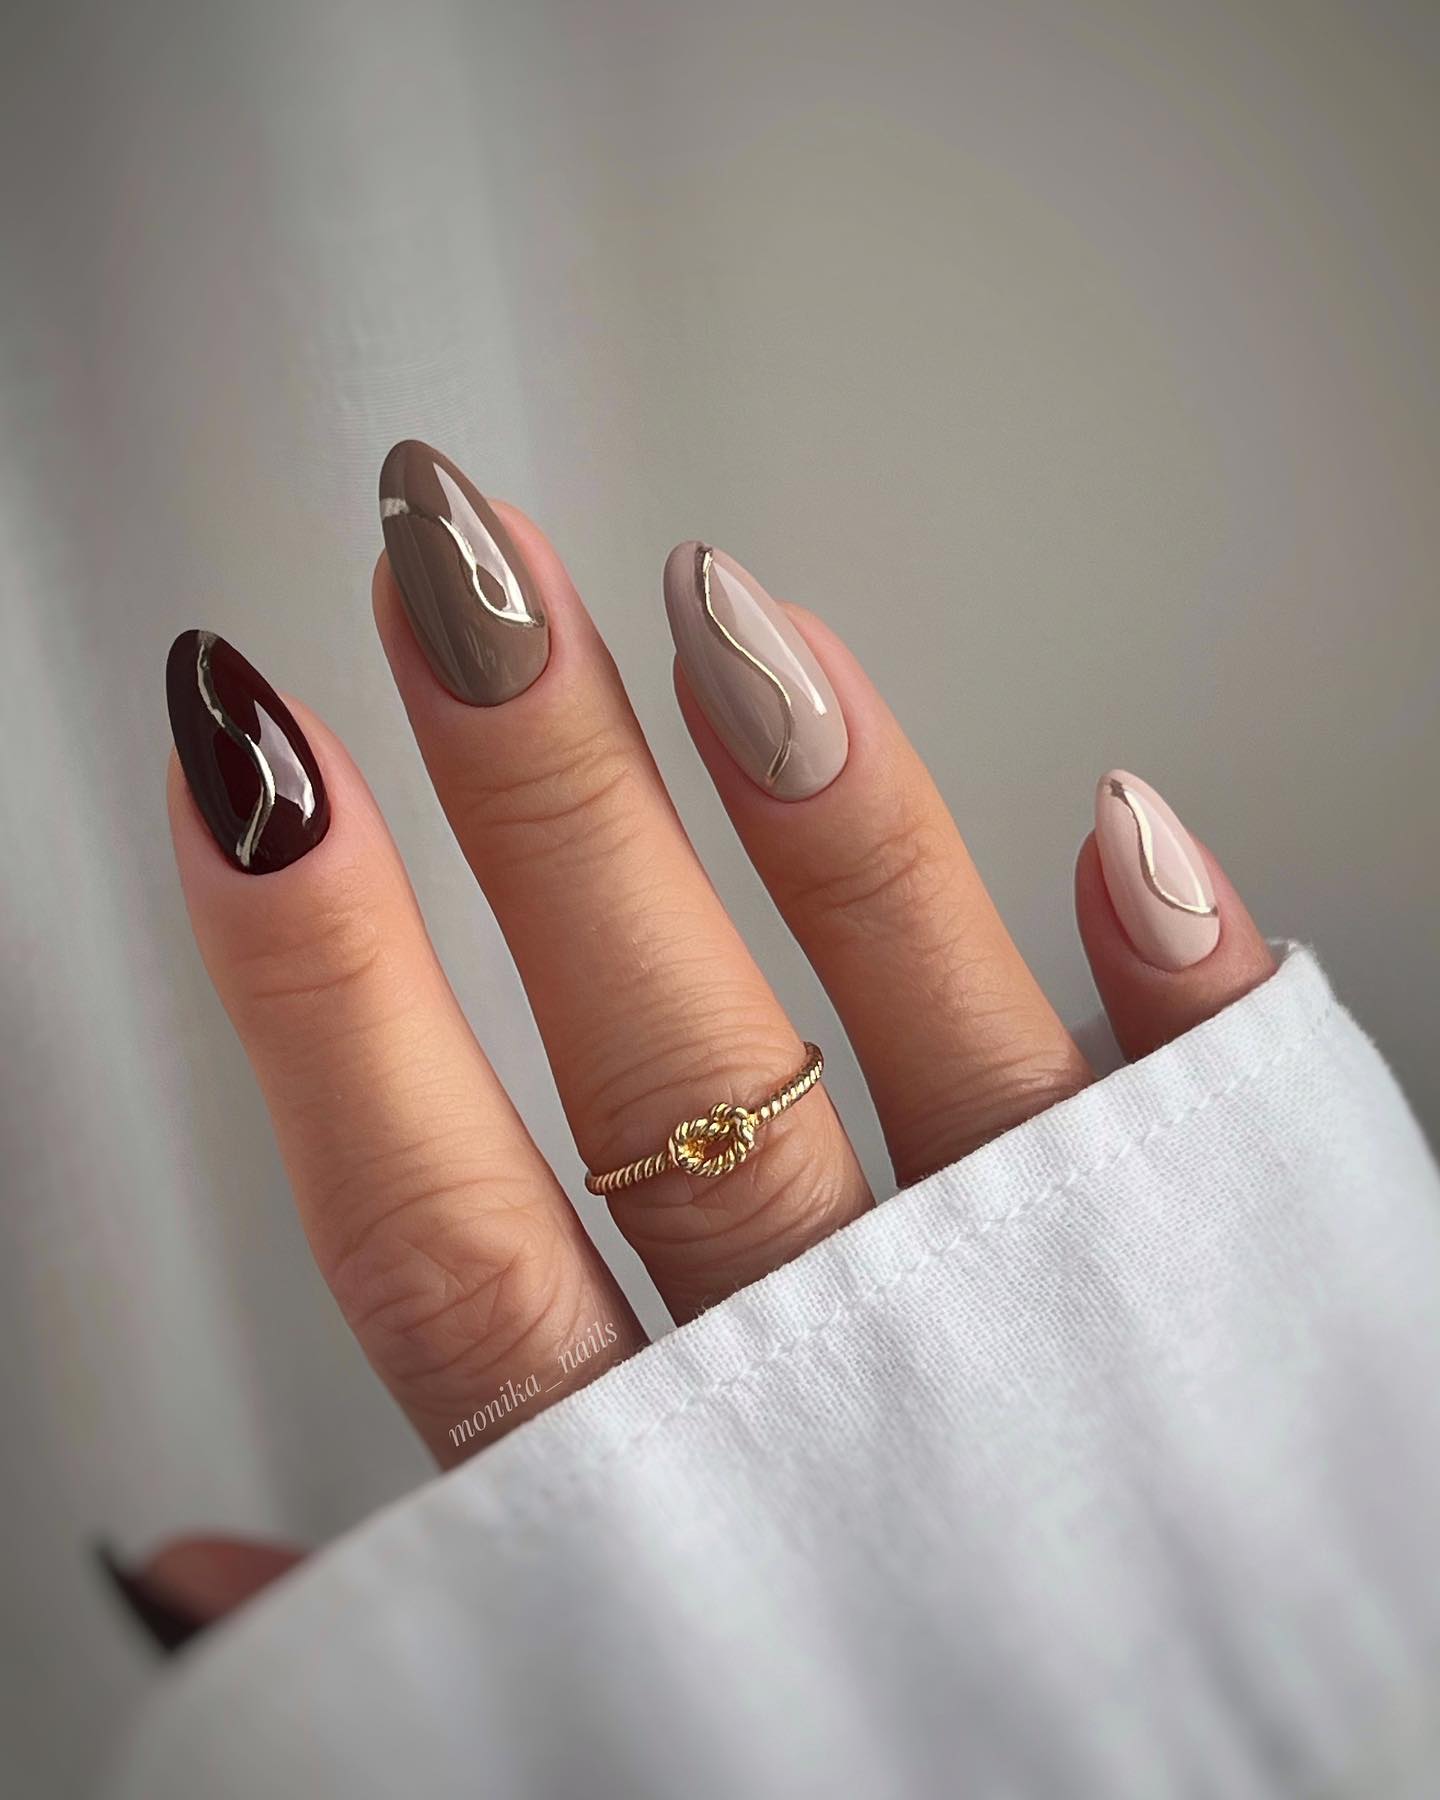 All Shades of Brown on Almond Nails